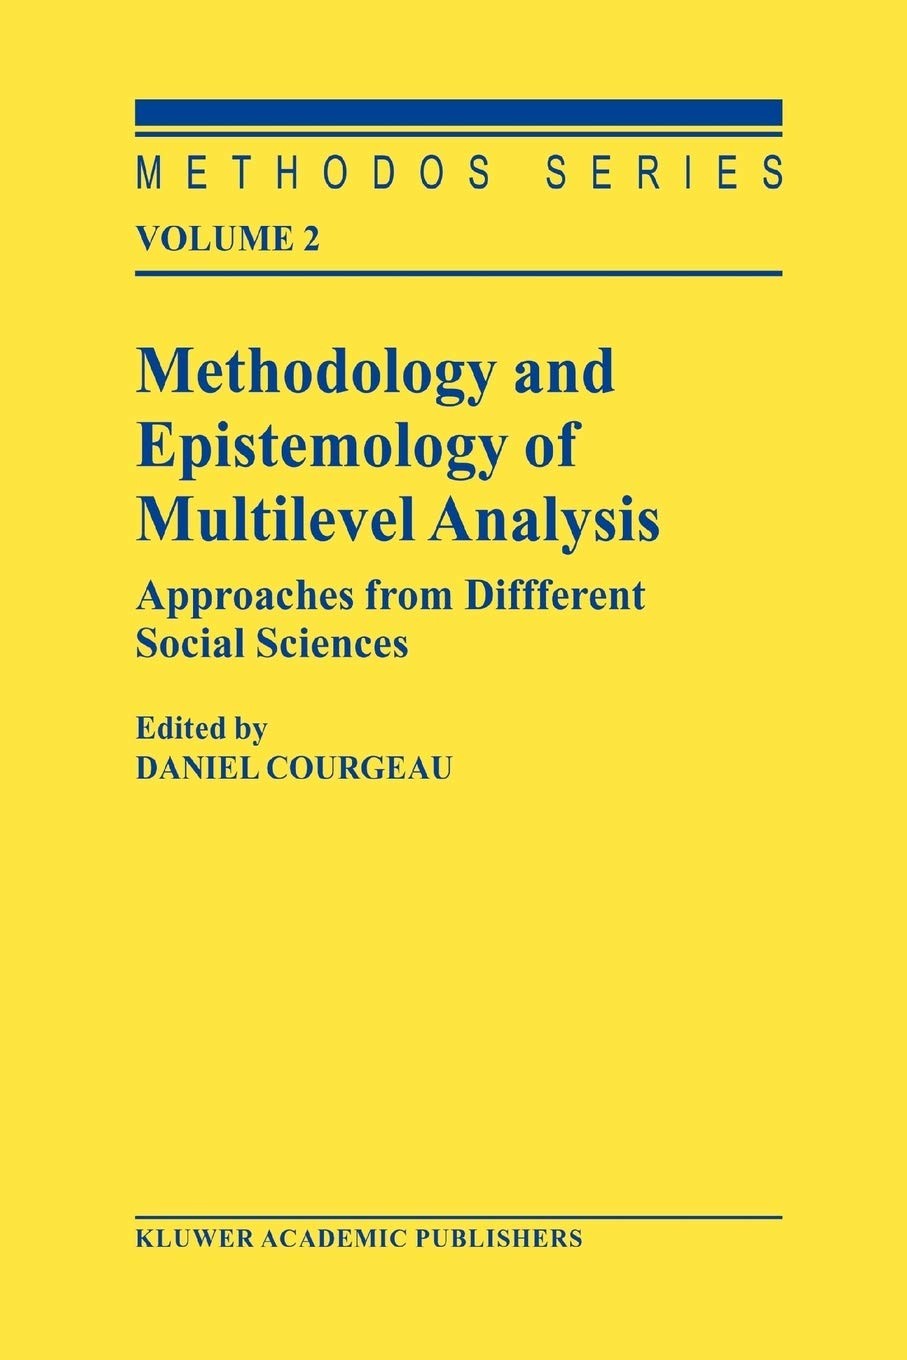 Methodology and Epistemology of Multilevel Analysis: Approaches From Different Social Sciences